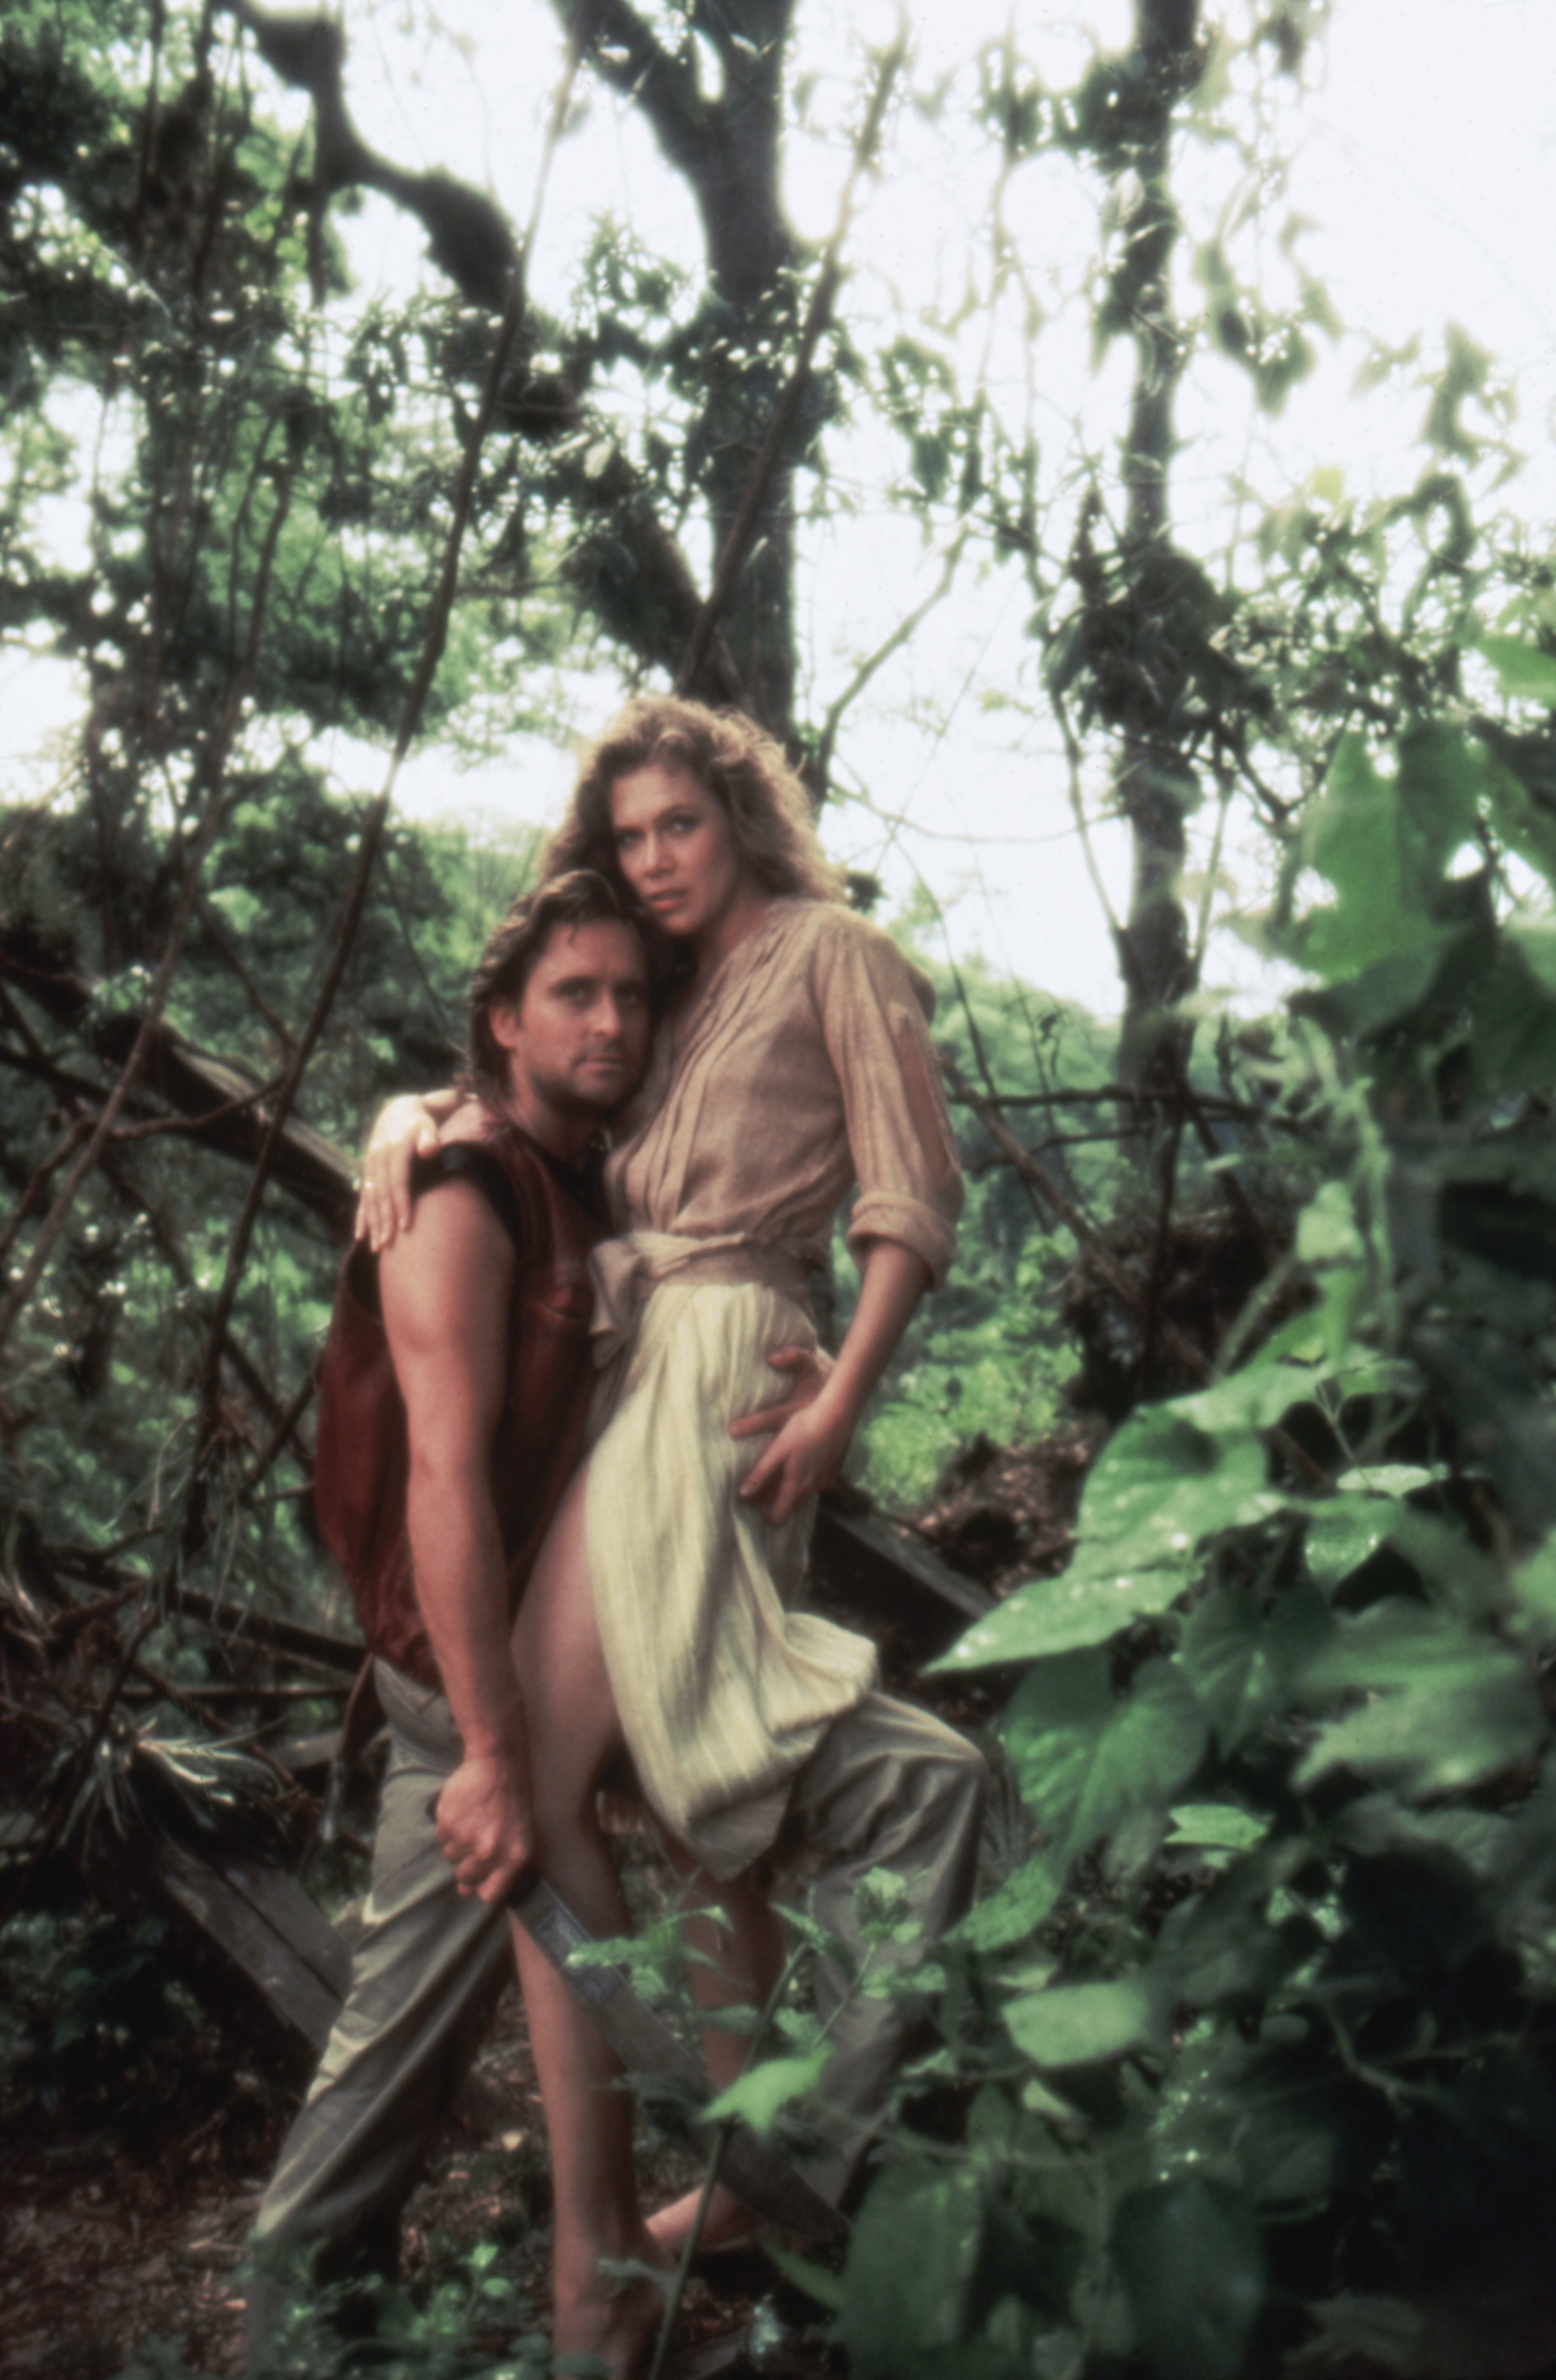 Michael Douglas and Kathleen Turner on the set of "Romancing the Stone" in 1984. | Source: Getty Images